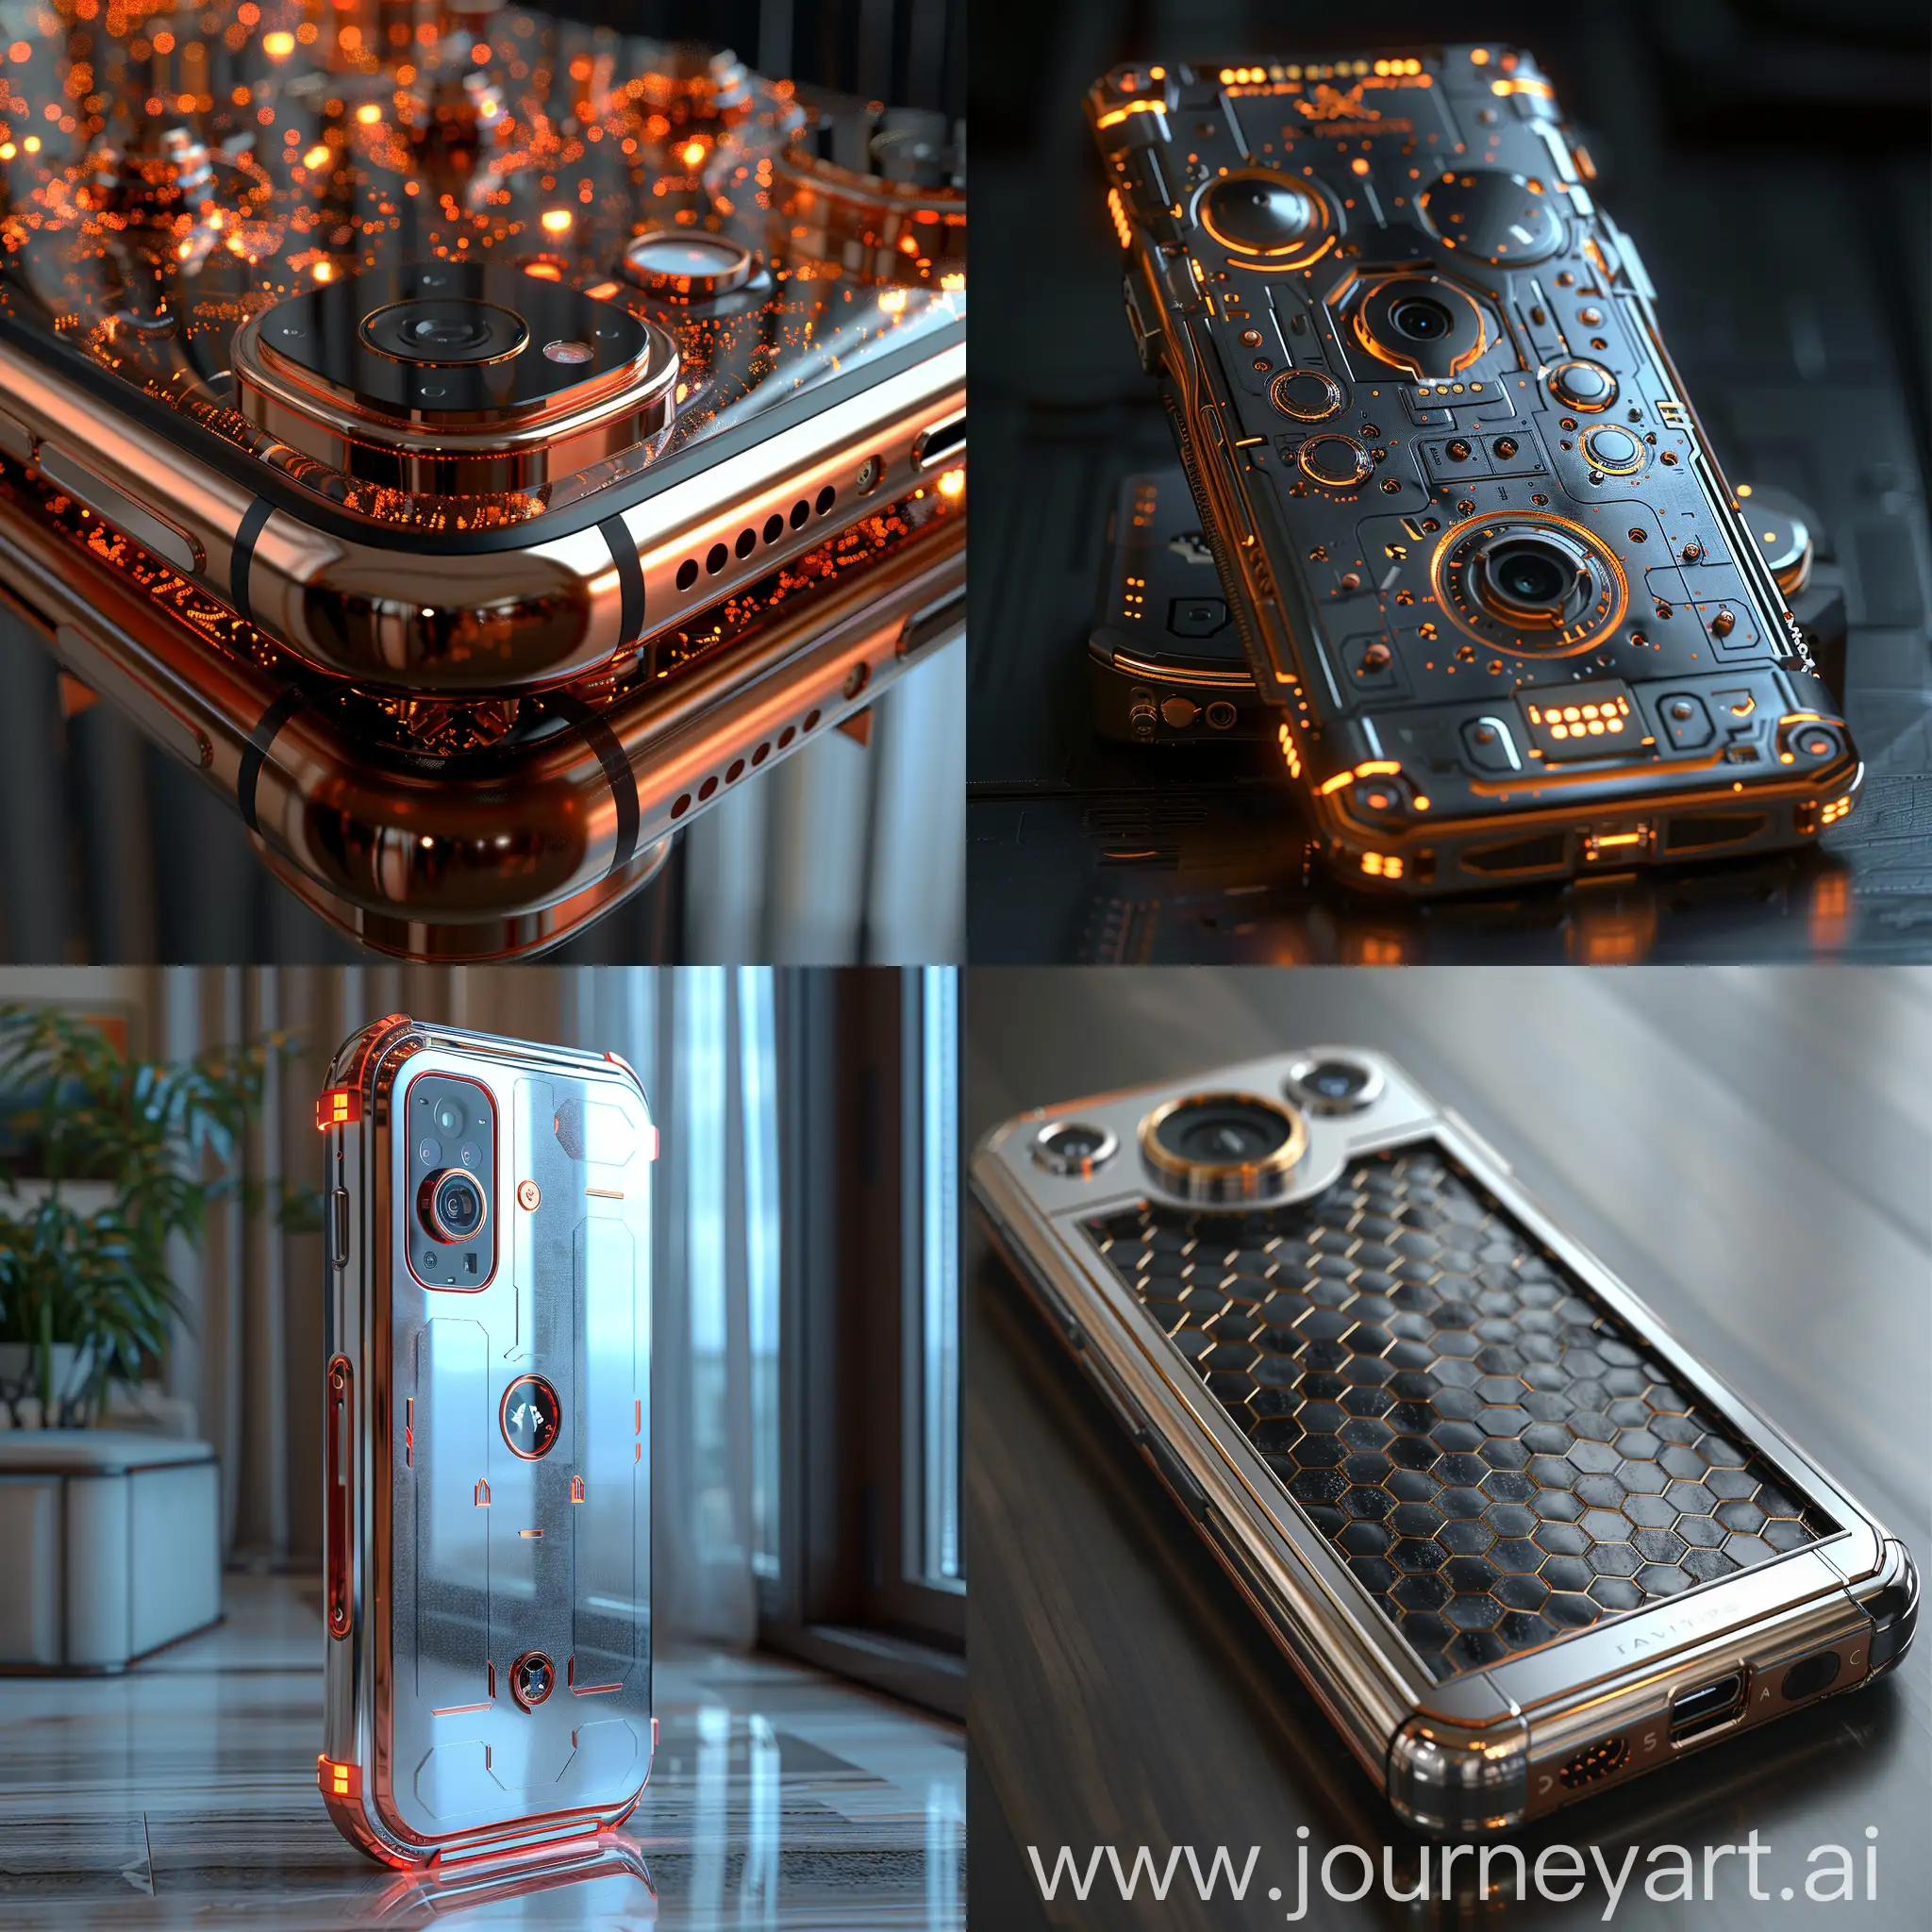 Futuristic-Stainless-Steel-Smartphone-with-Advanced-Smart-Materials-High-Tech-Octane-Render